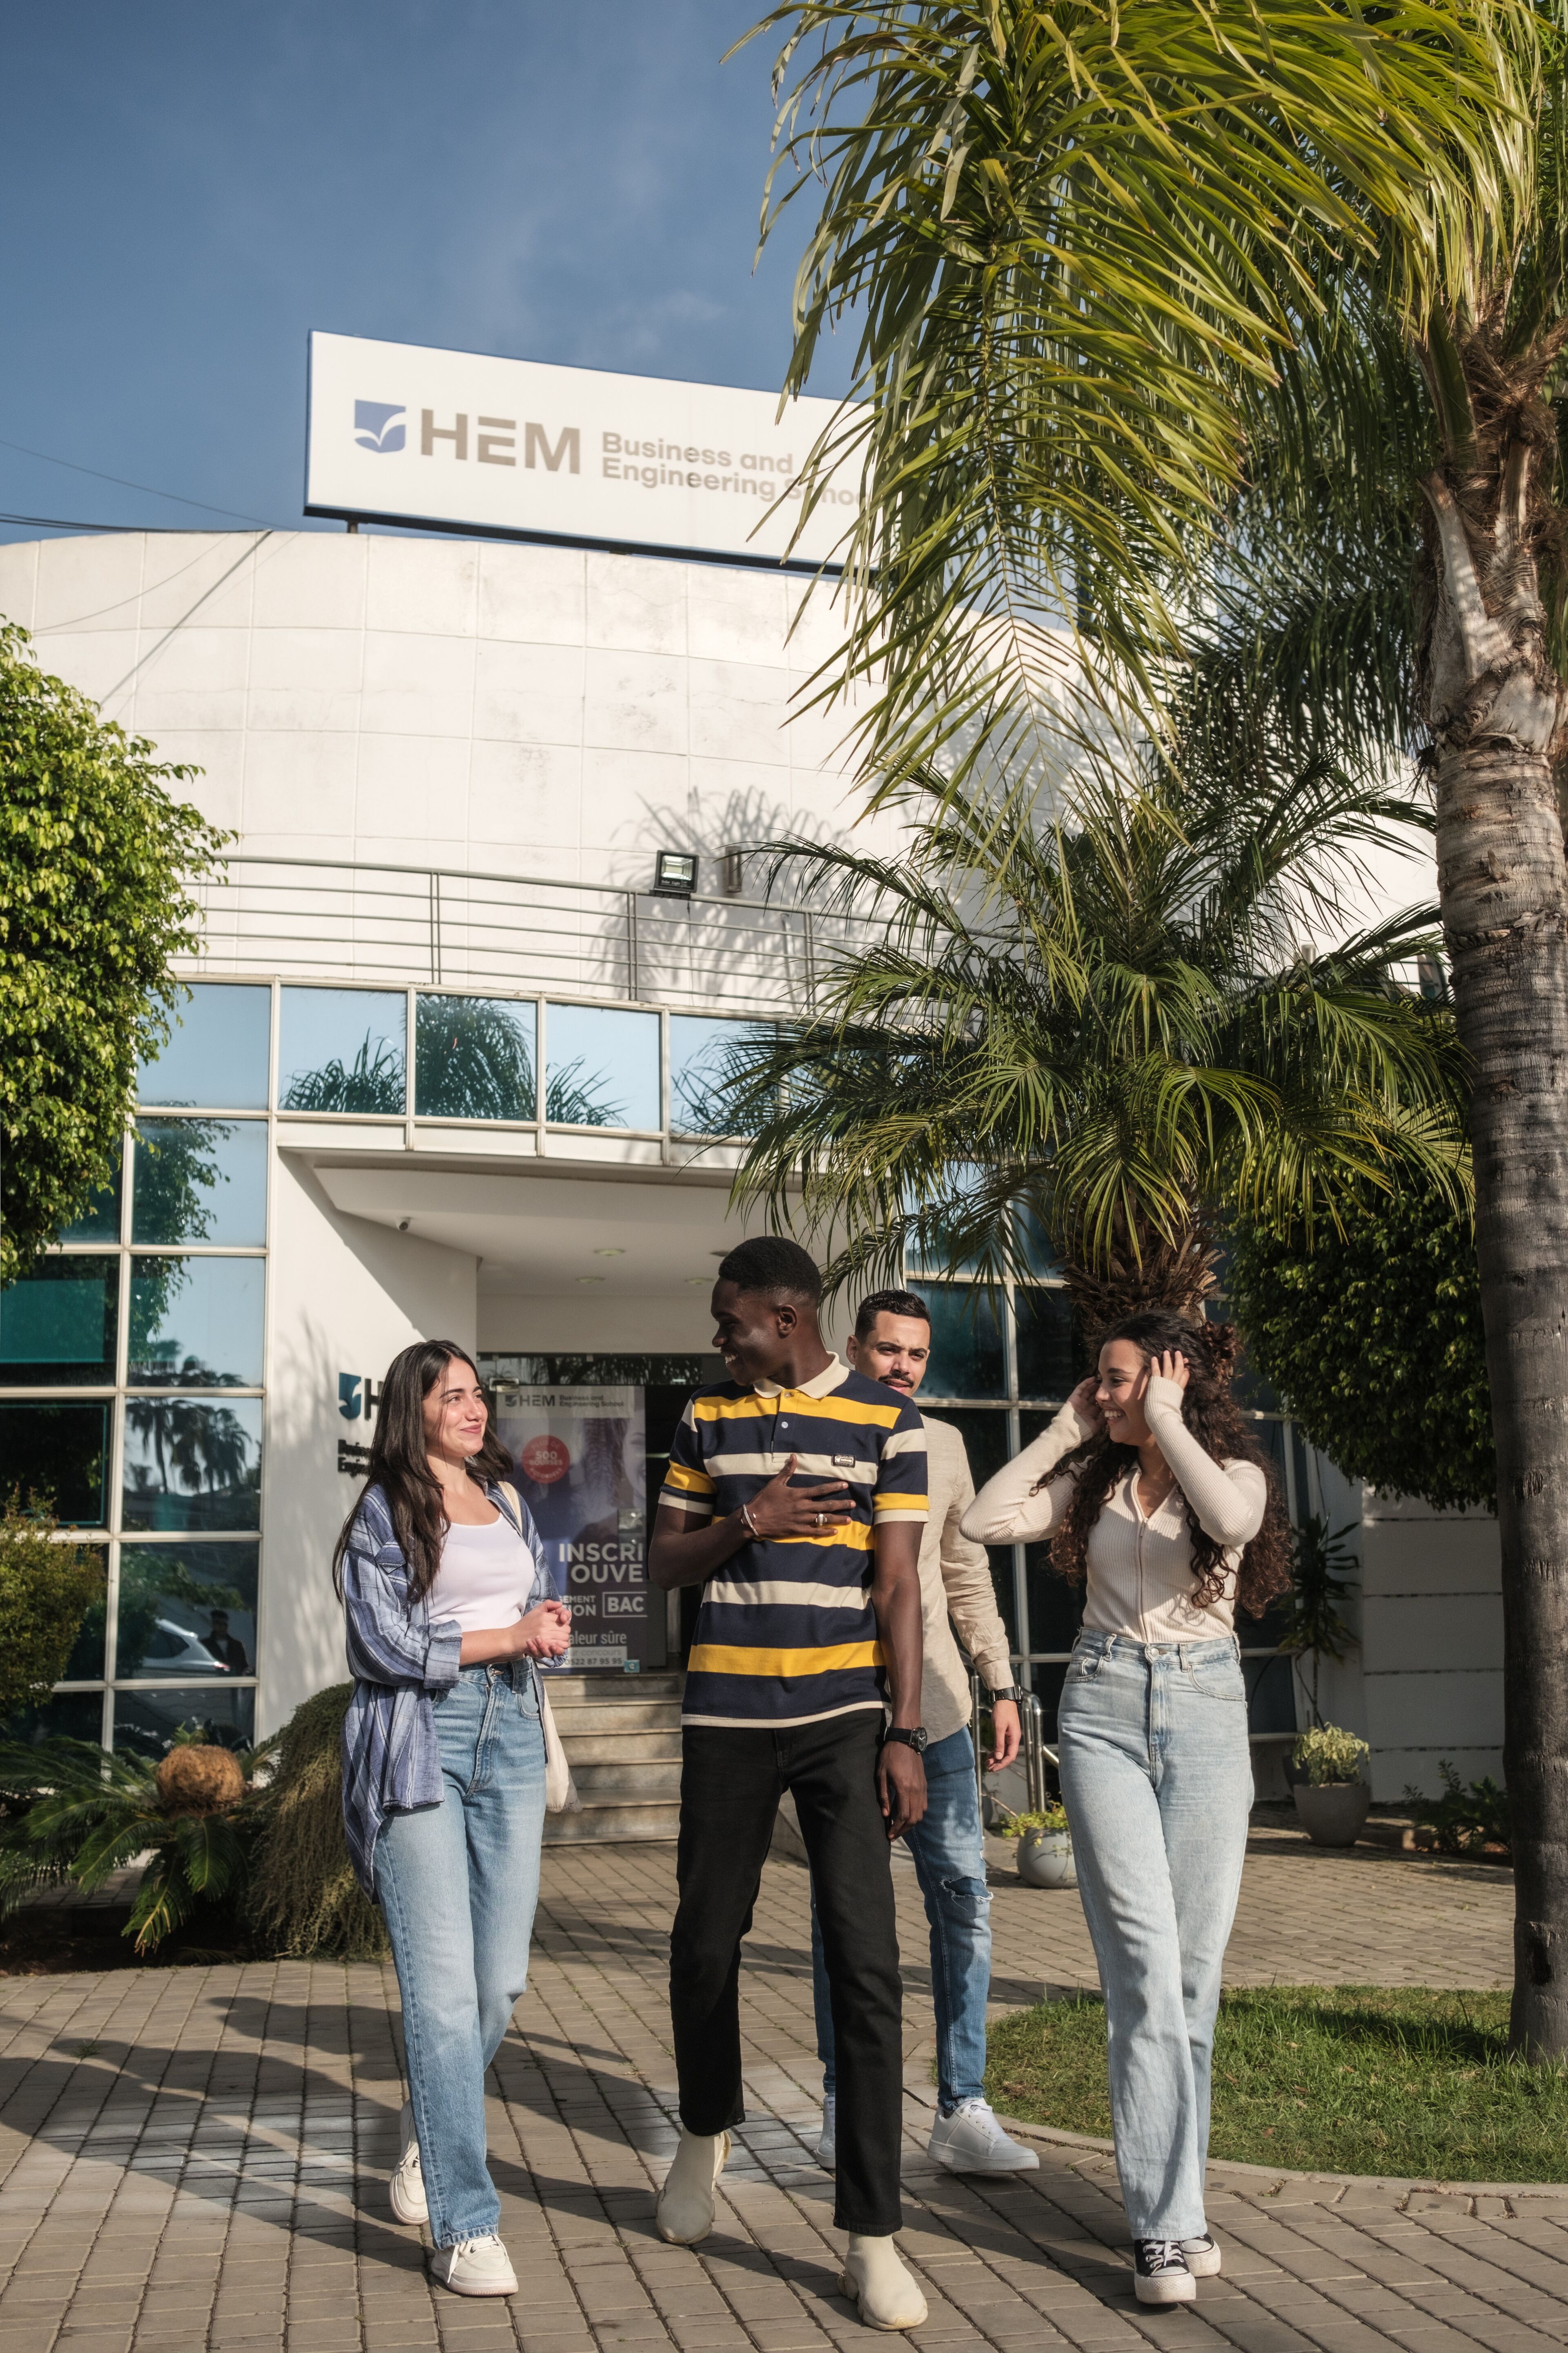 A group of young students walking and talking at the entrance of a business and engineering school campus.